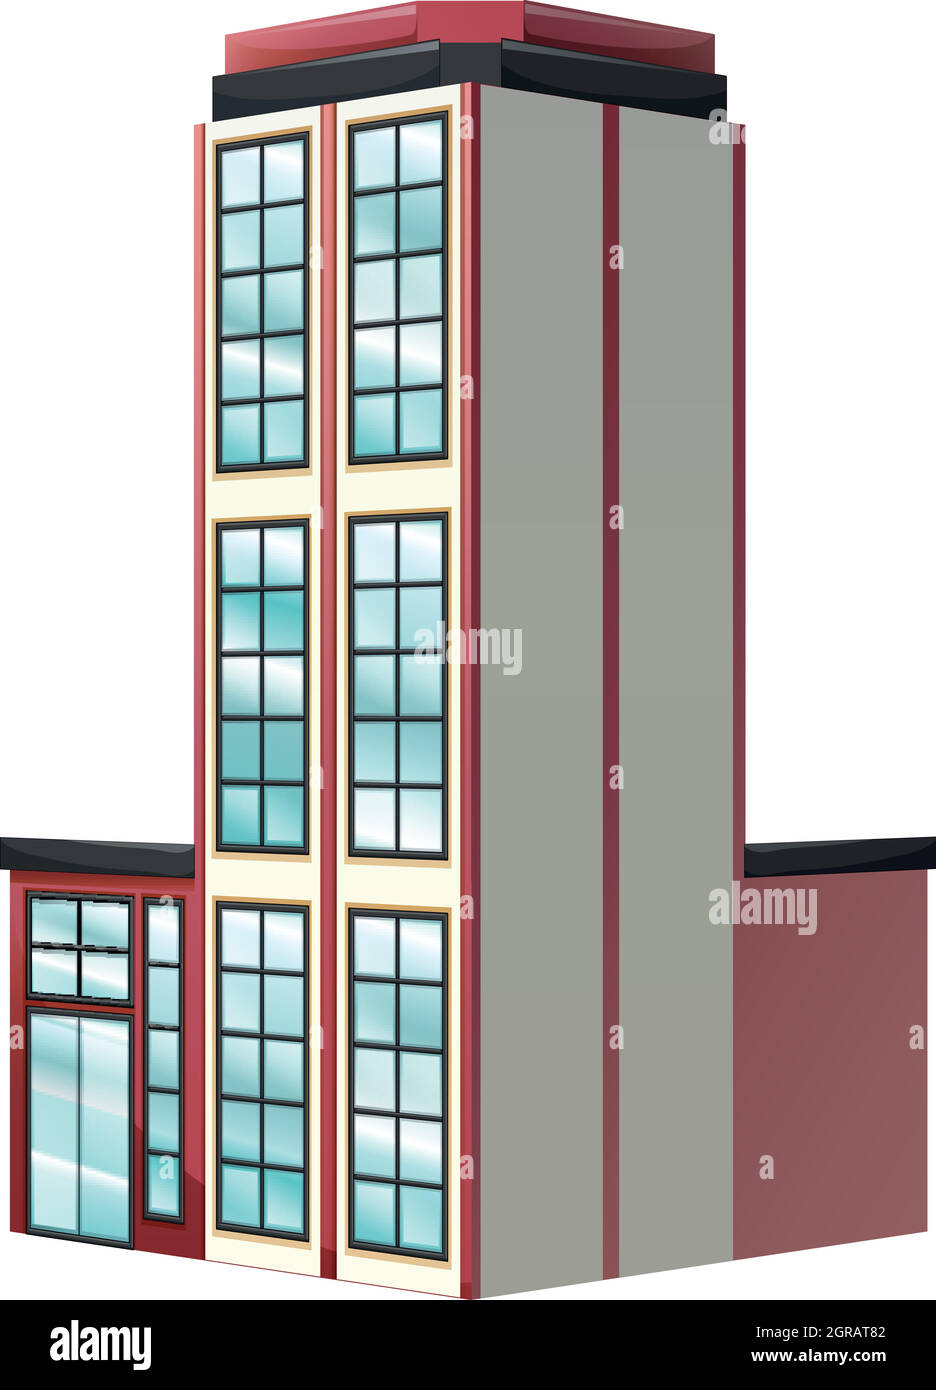 Architecture design for apartment building in red Stock Vector